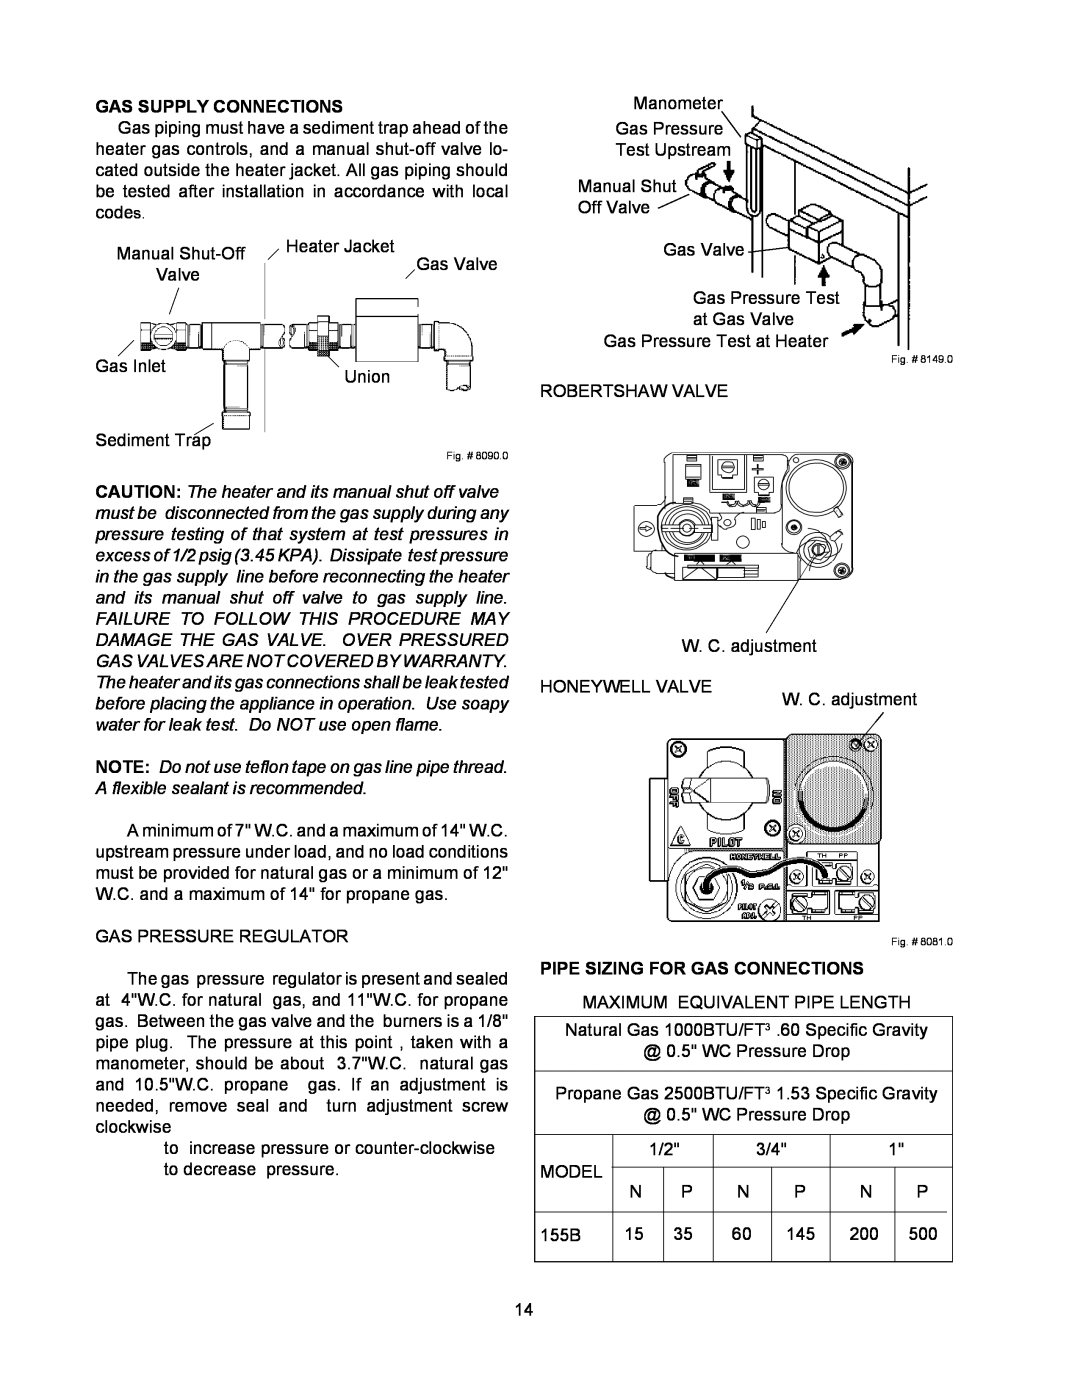 Raypak 155C installation instructions Gas Supply Connections, Pipe Sizing For Gas Connections 